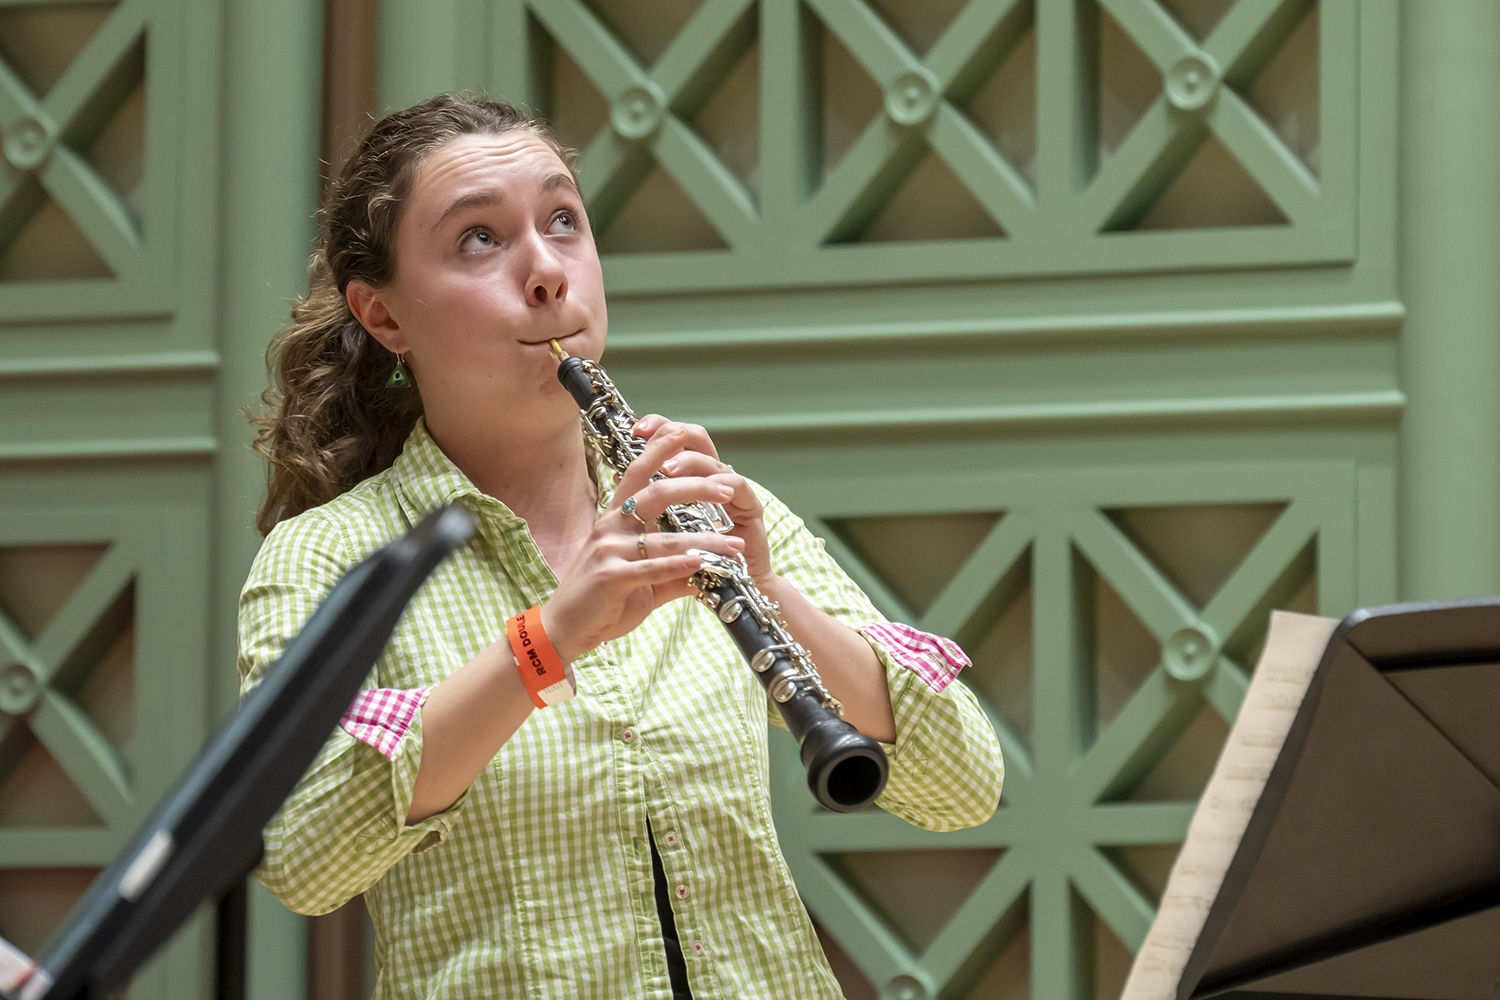 An oboist performing in the Royal College of Music's Performance Hall